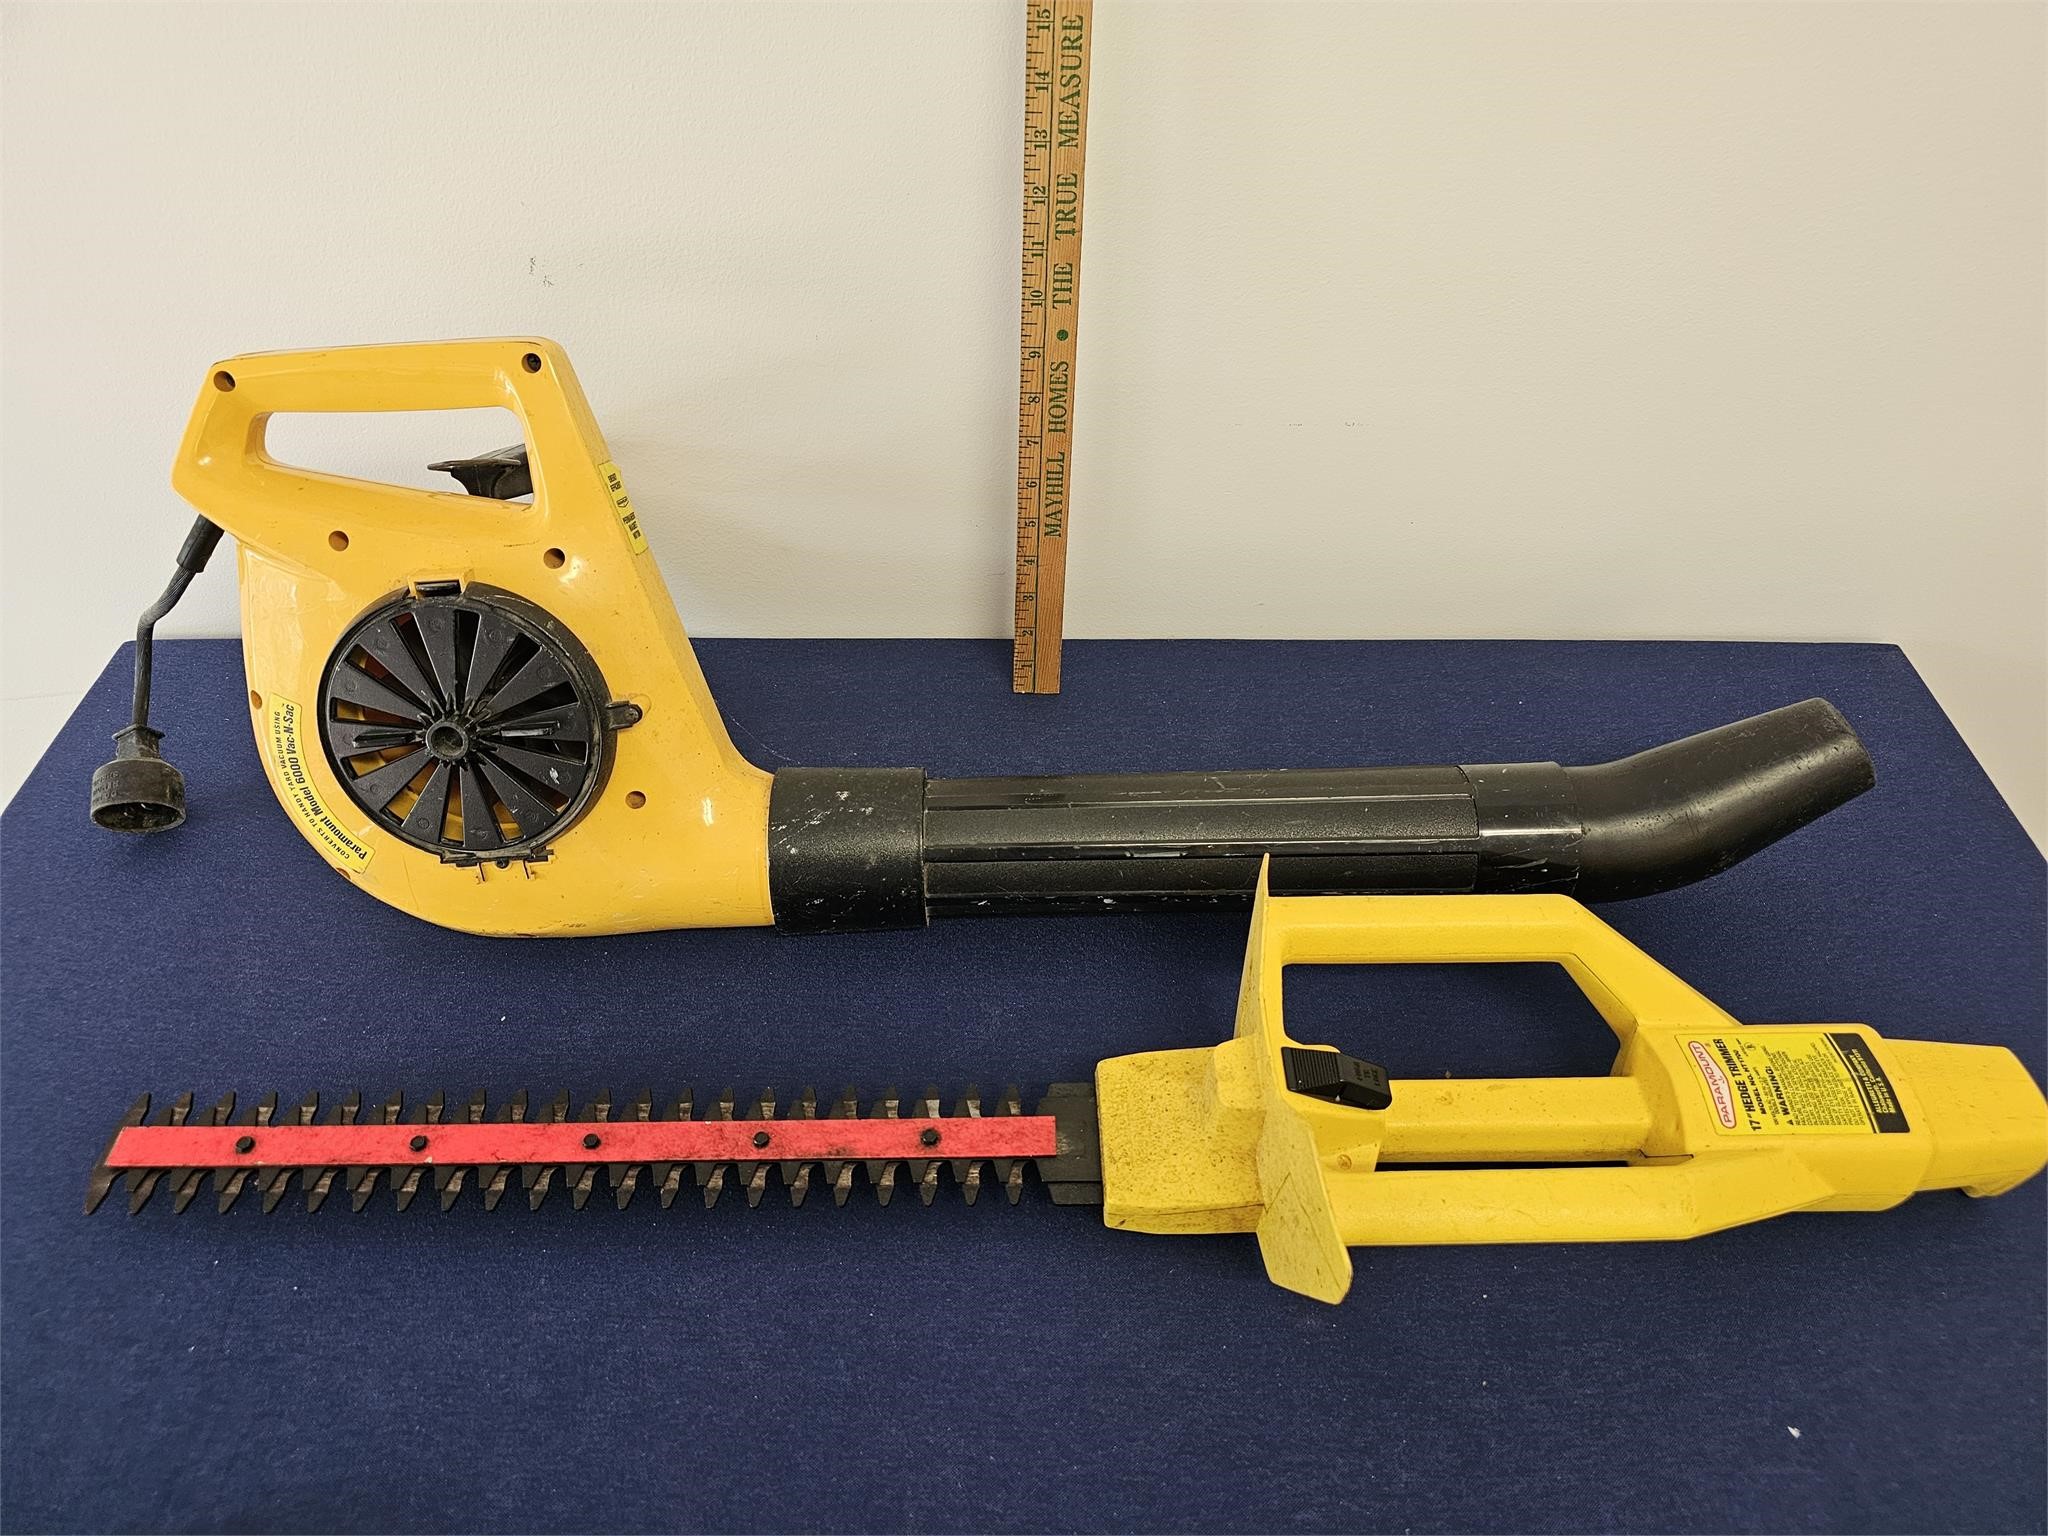 paramount hedge trimmer, blower